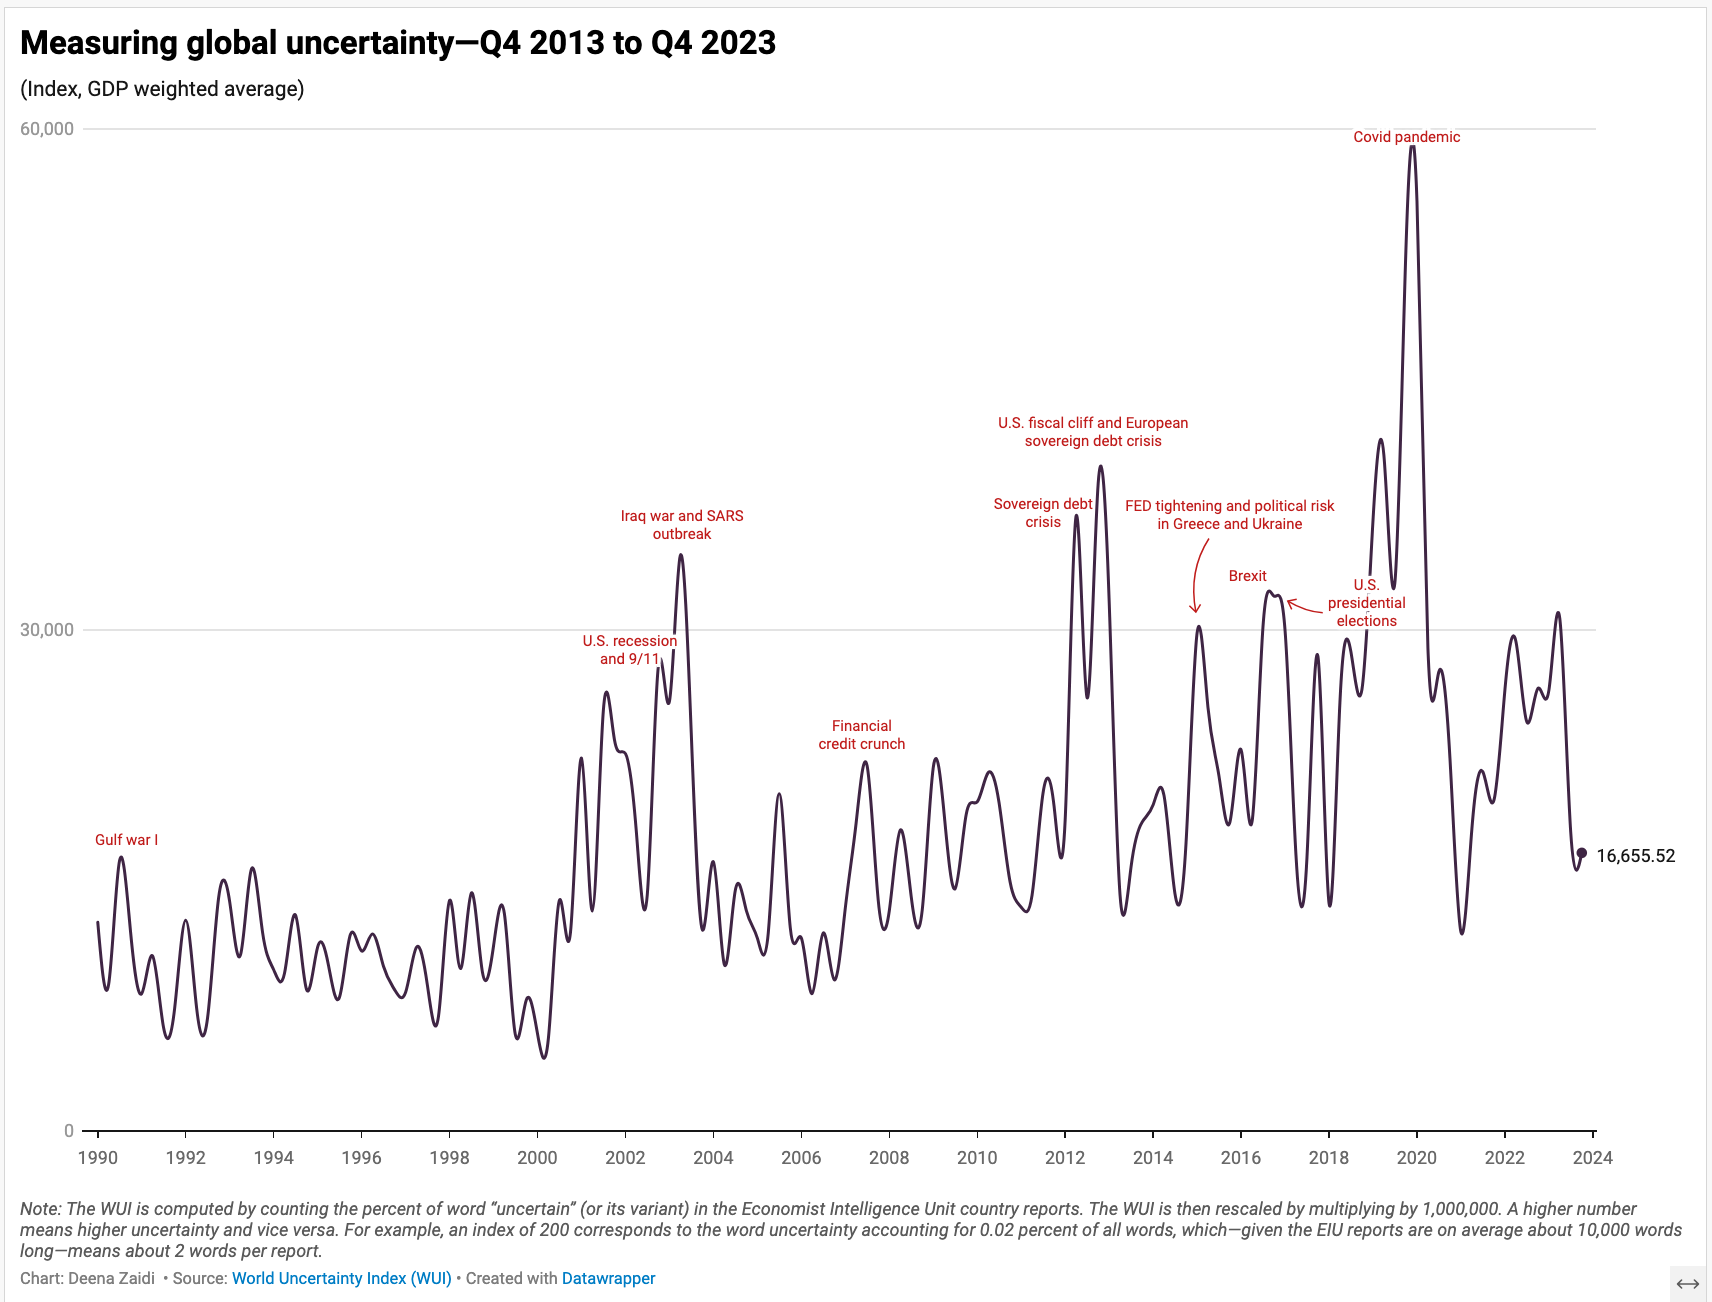 A line chart showing geopolitical events impacting the world uncertainty index